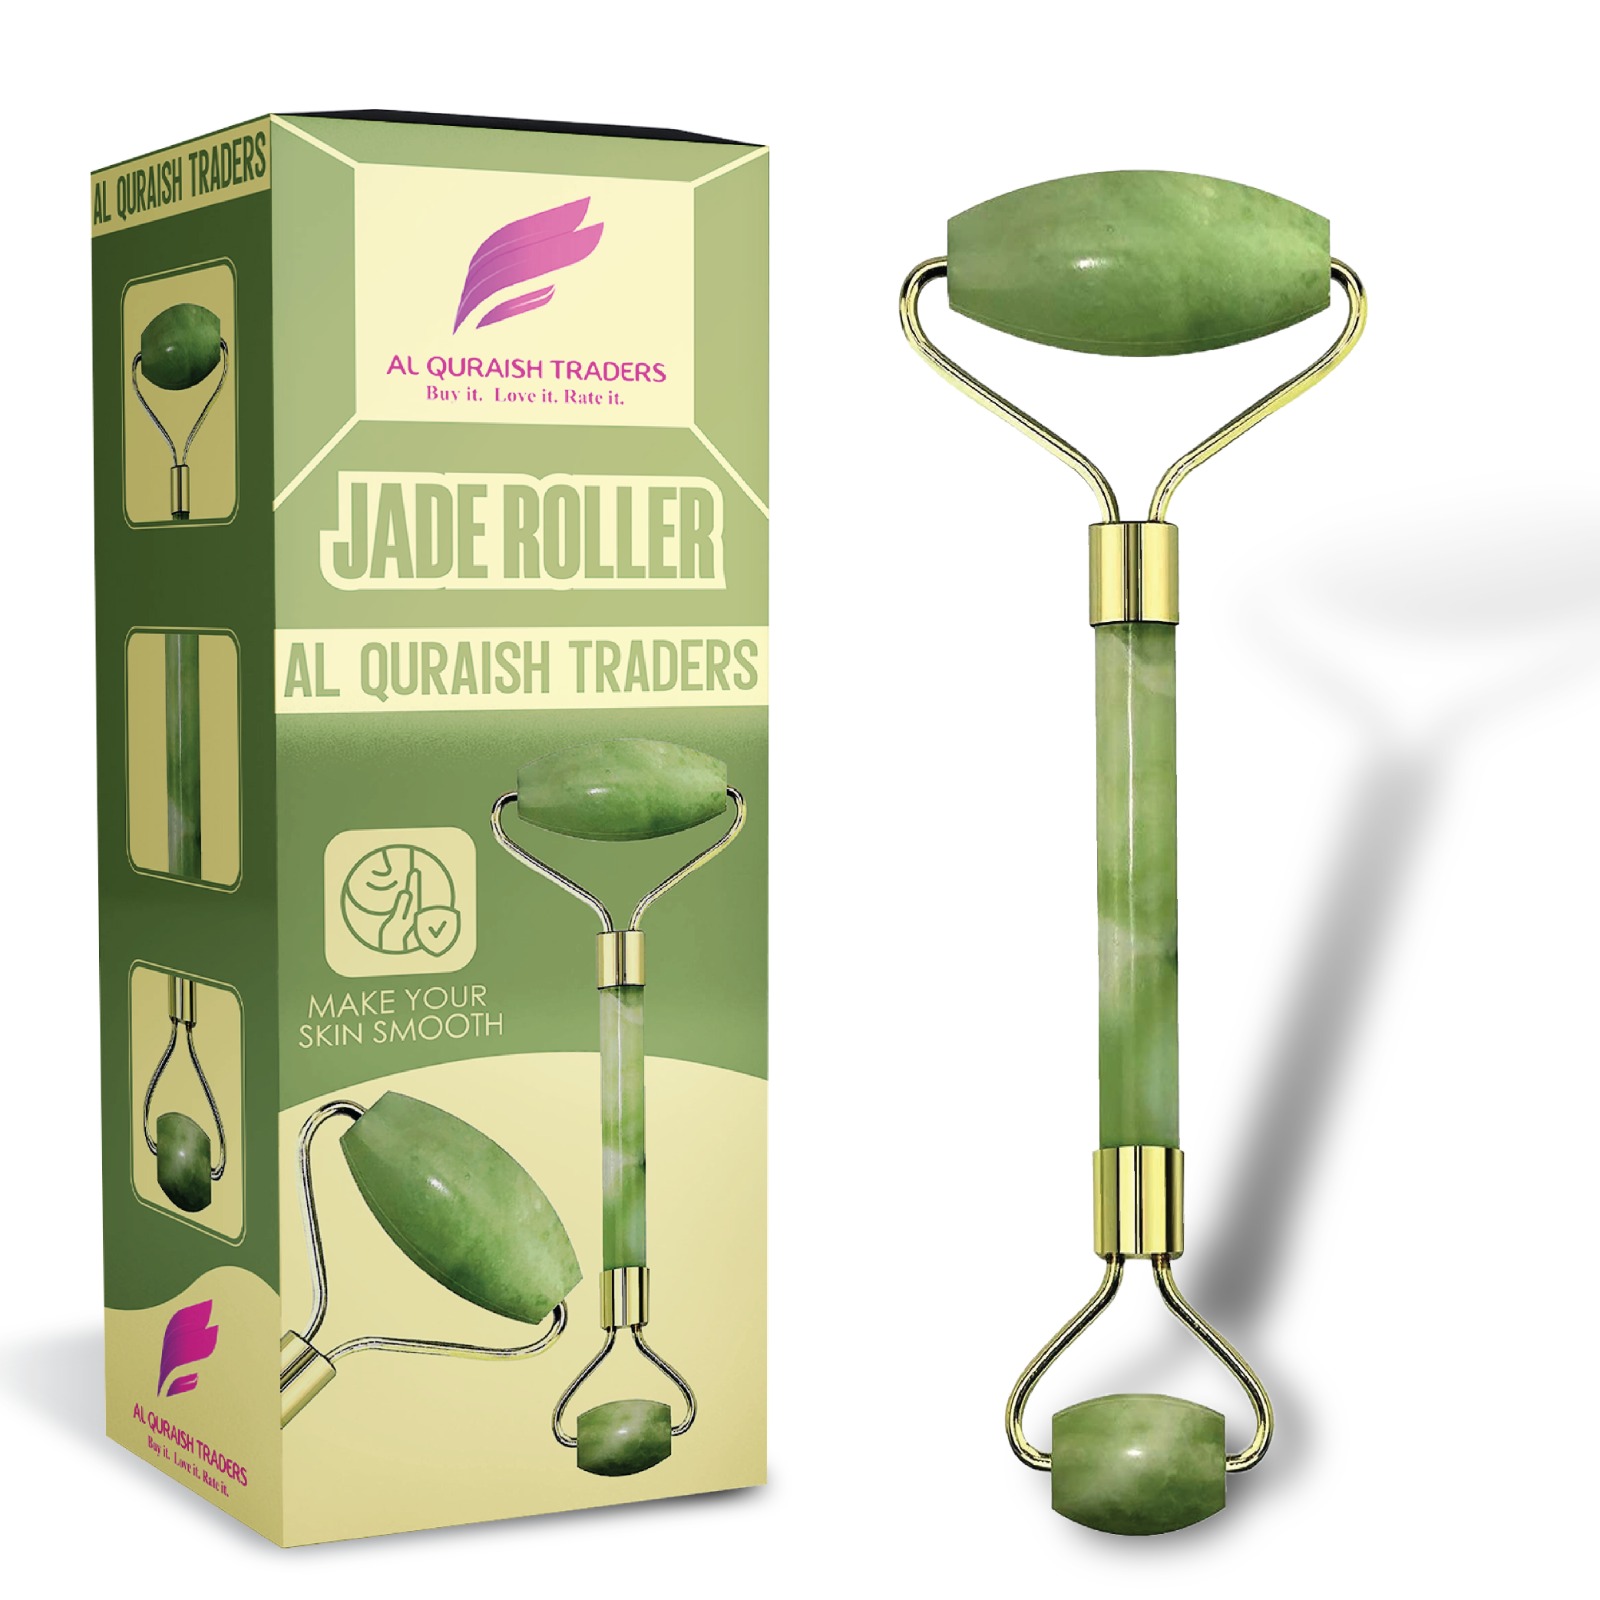 Anti-aging Natural Stone Jade Roller With Noiseless Double Heads For Face Massage Slimming Facial Relaxation And Face Lift With Natural Jade Stones